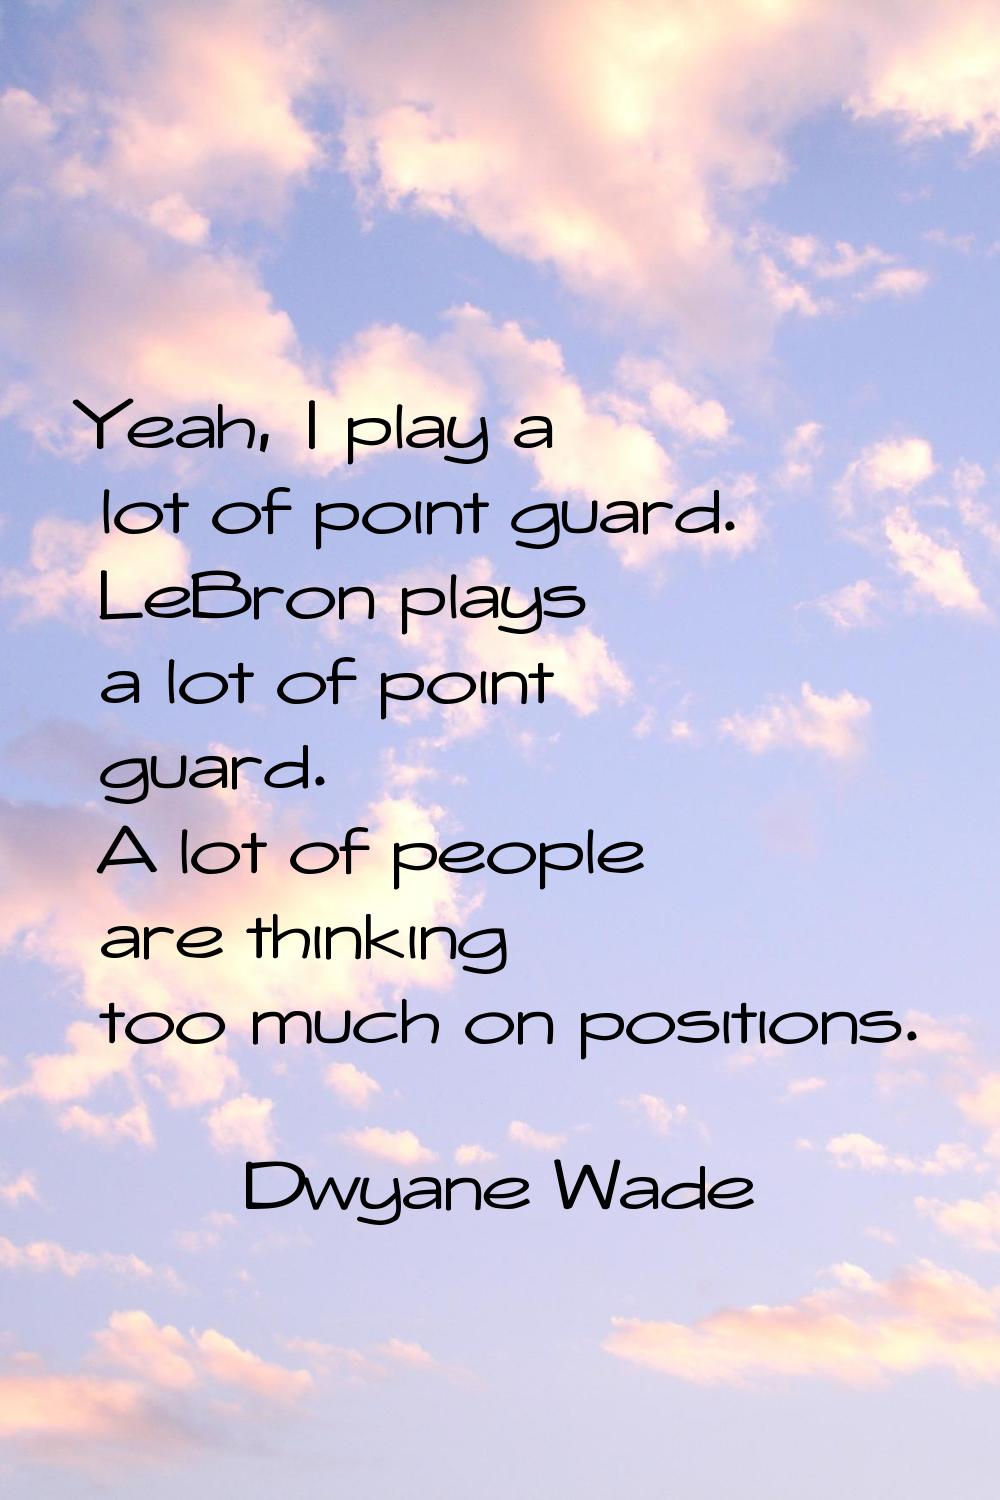 Yeah, I play a lot of point guard. LeBron plays a lot of point guard. A lot of people are thinking 